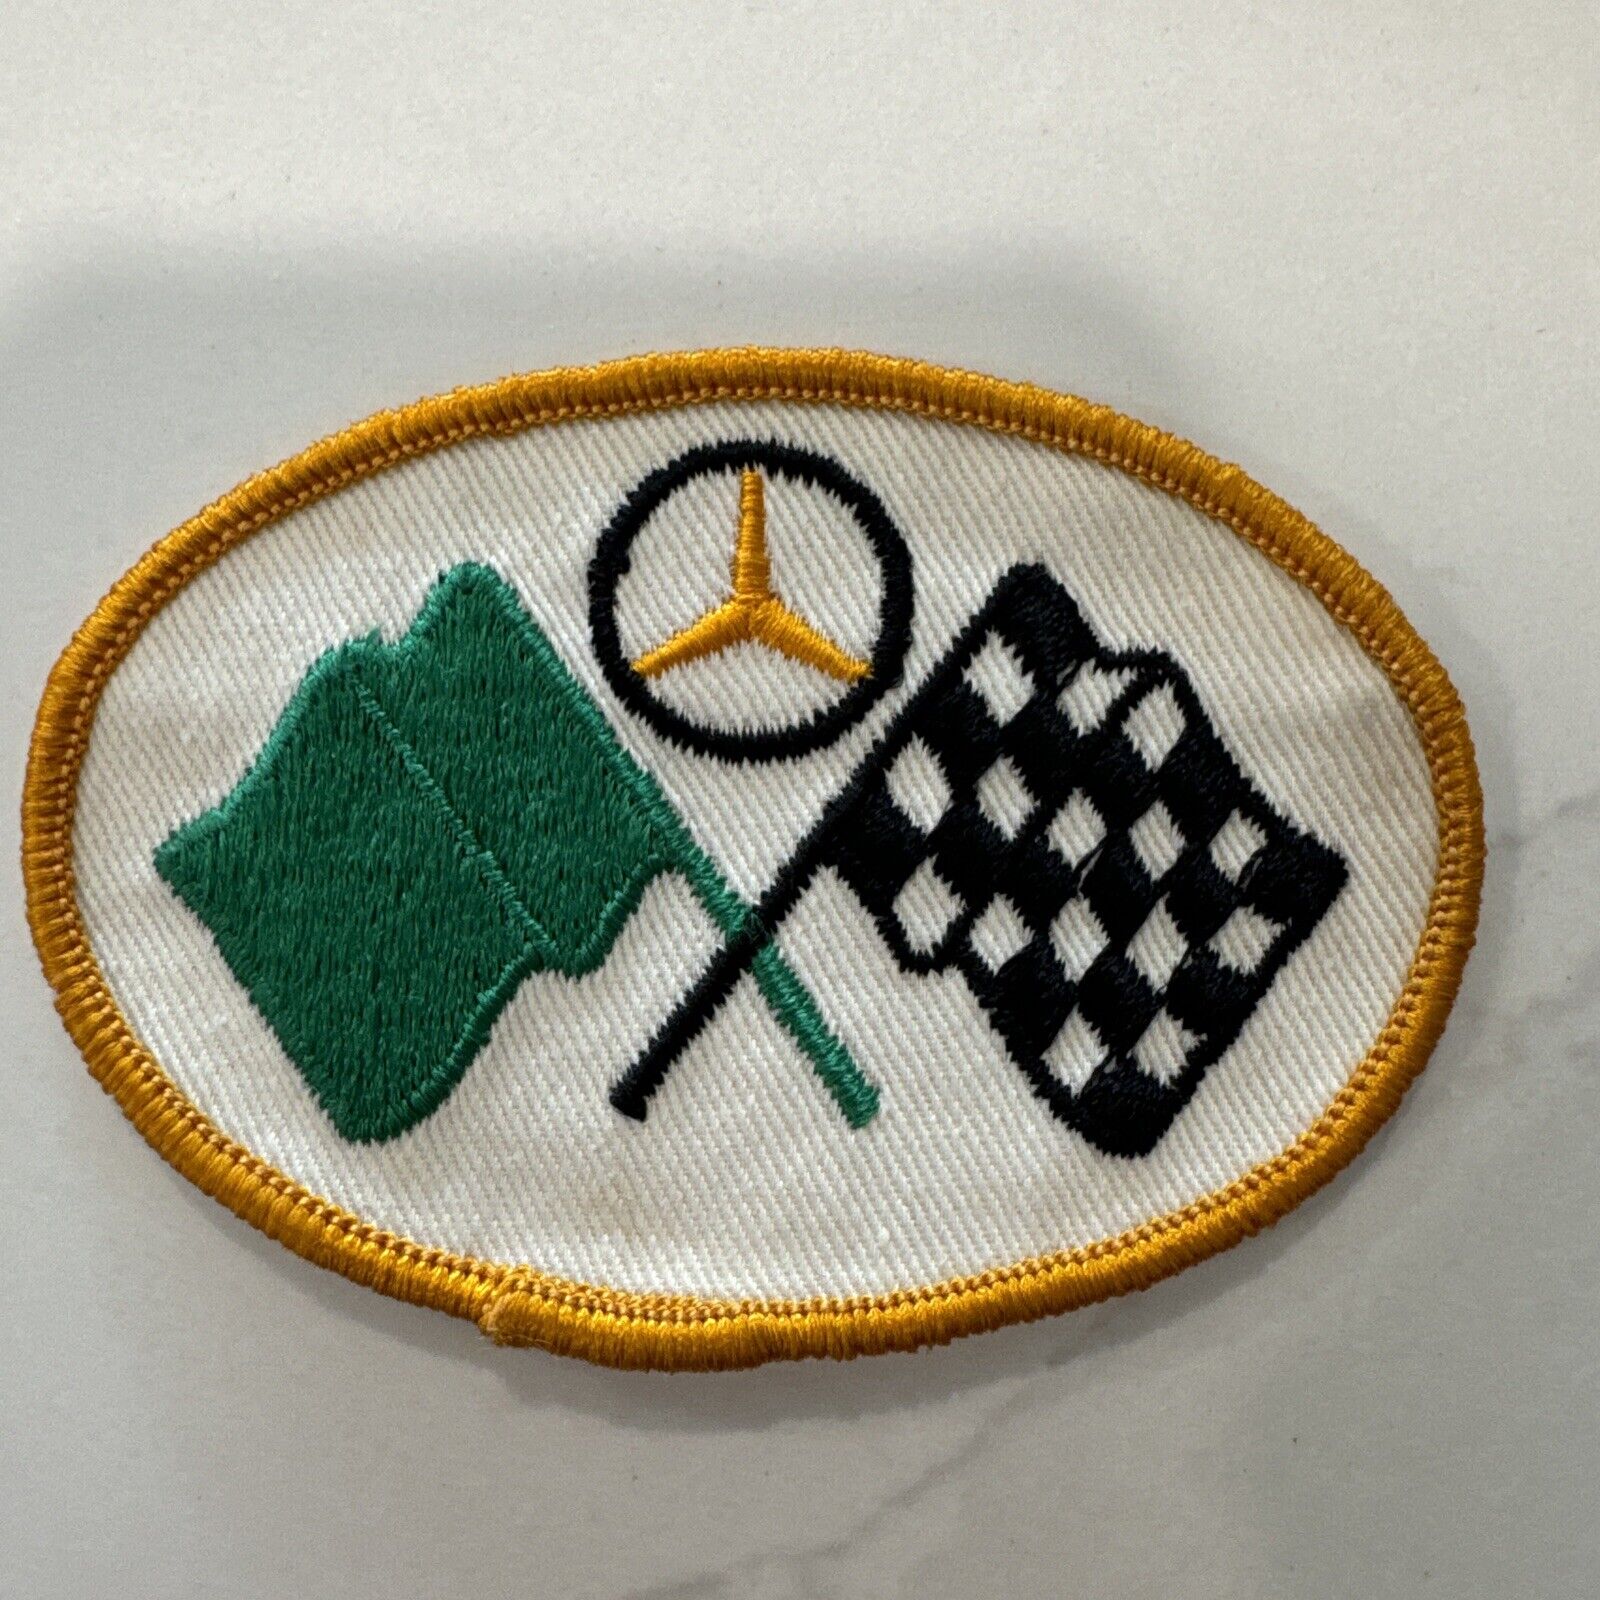 Vintage 70s Mercedes Emblem Racing Checkered Flag Green Flag Embroidered Patch